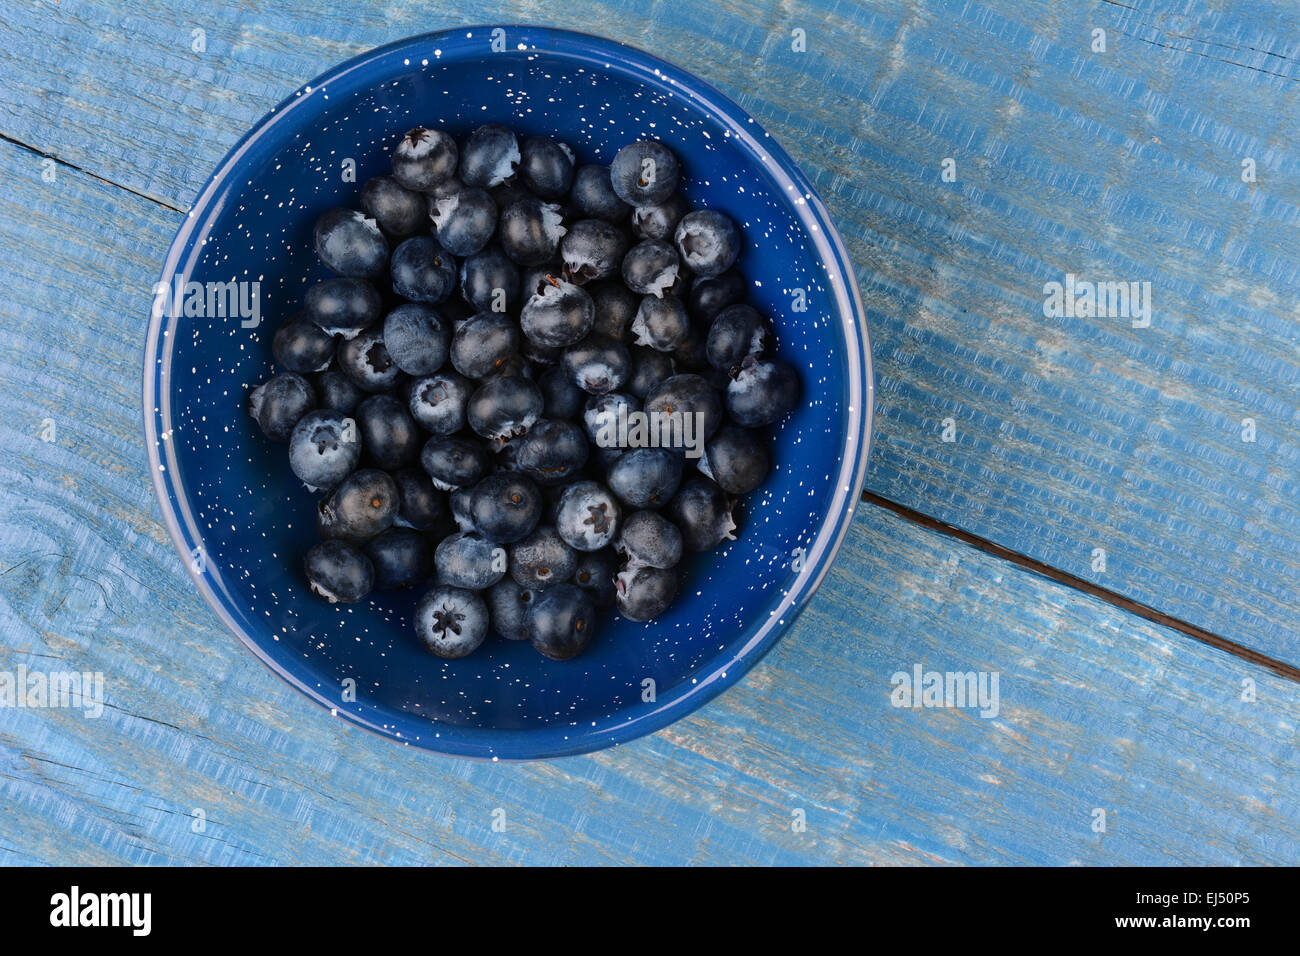 High angle image of an enamelware bowl full of fresh picked blueberries. Horizontal format on a blue wood kitchen table, with co Stock Photo